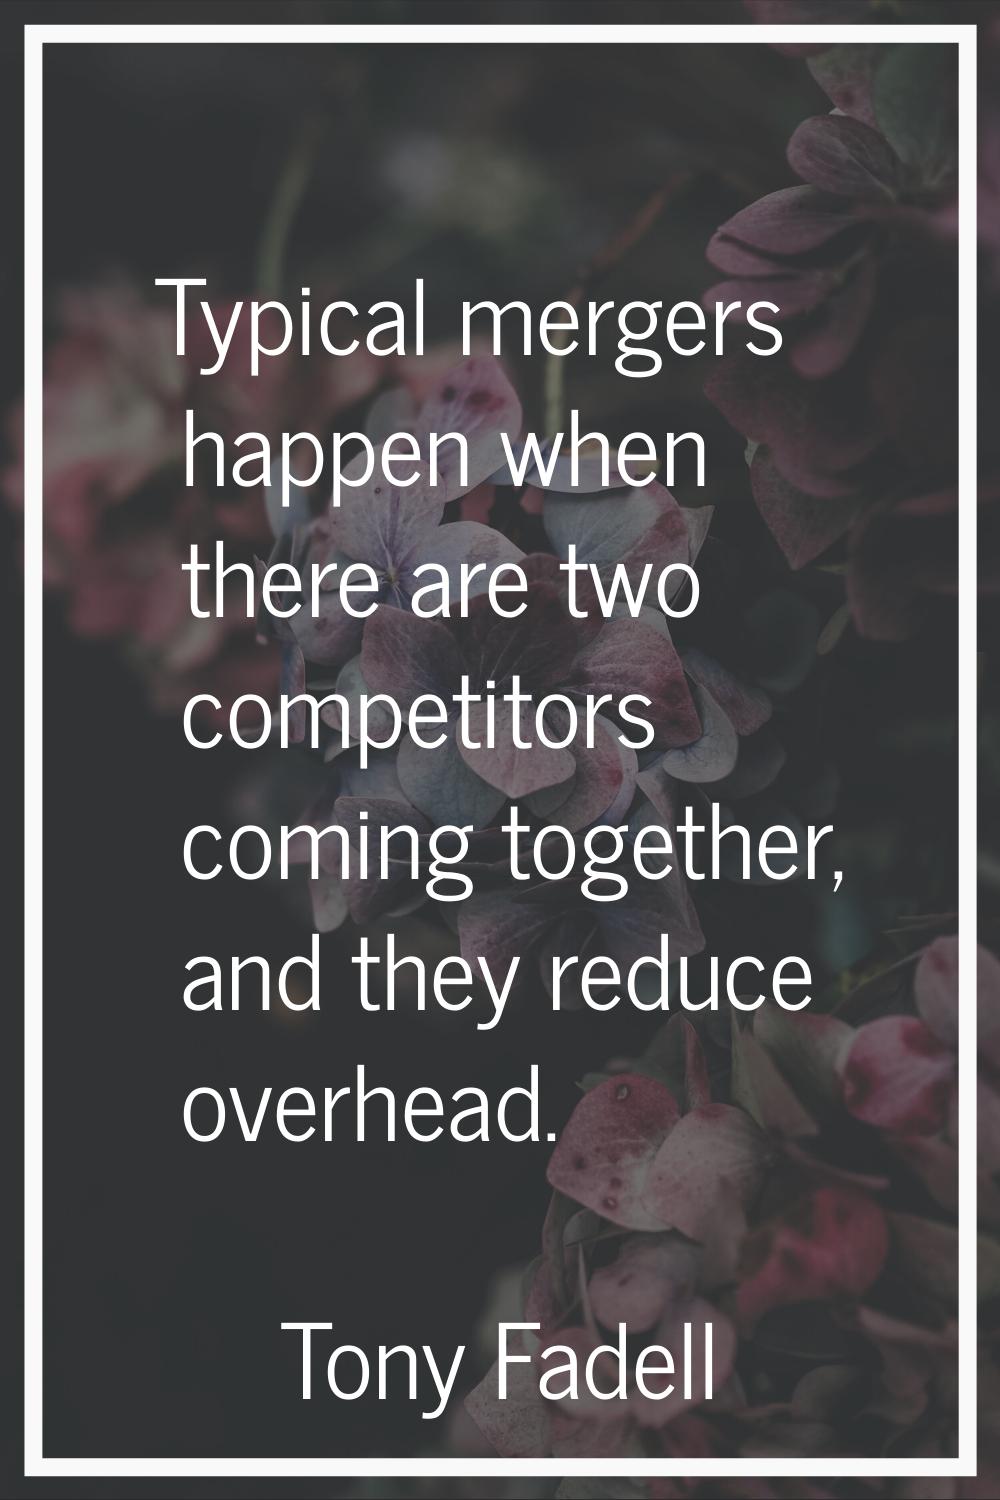 Typical mergers happen when there are two competitors coming together, and they reduce overhead.